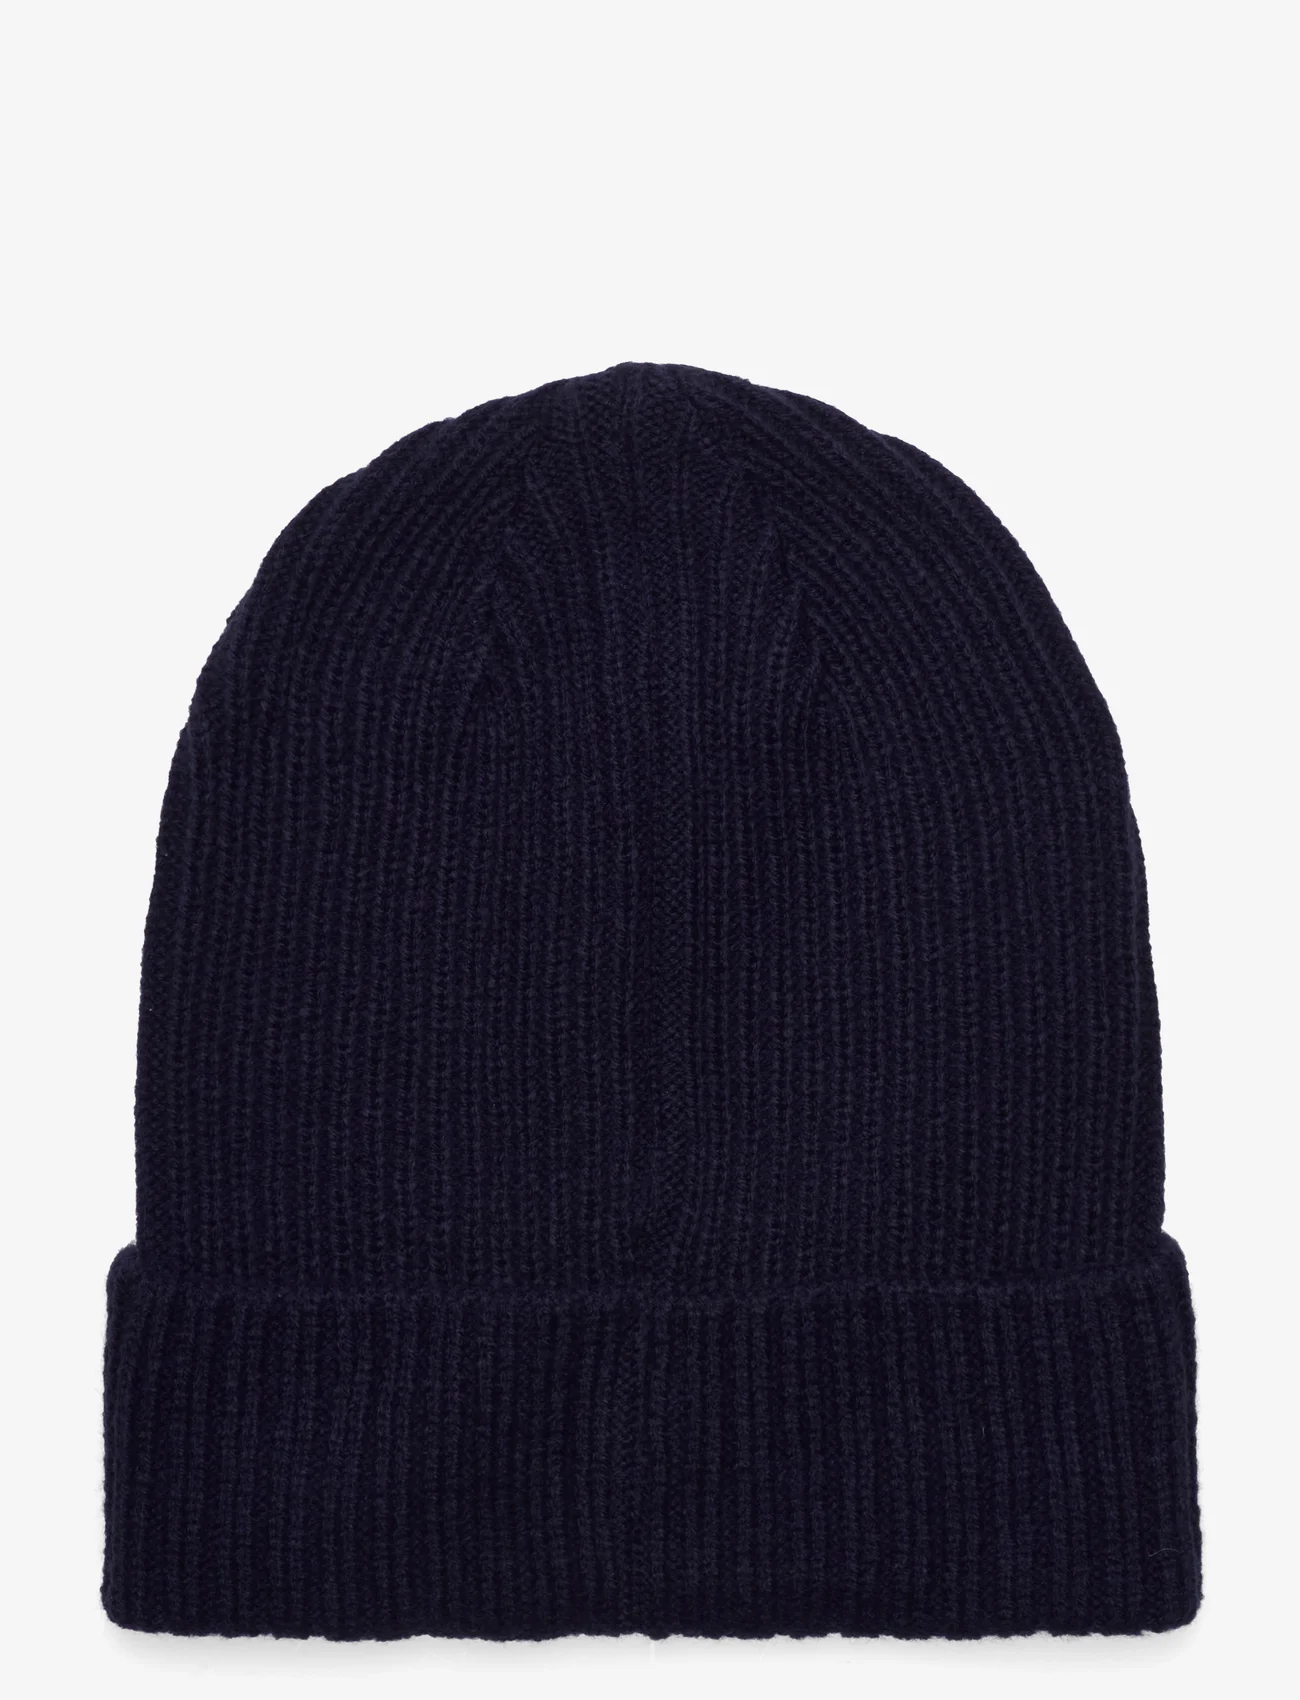 PUMA - Ribbed Classic Cuff Beanie - lowest prices - peacoat - 1